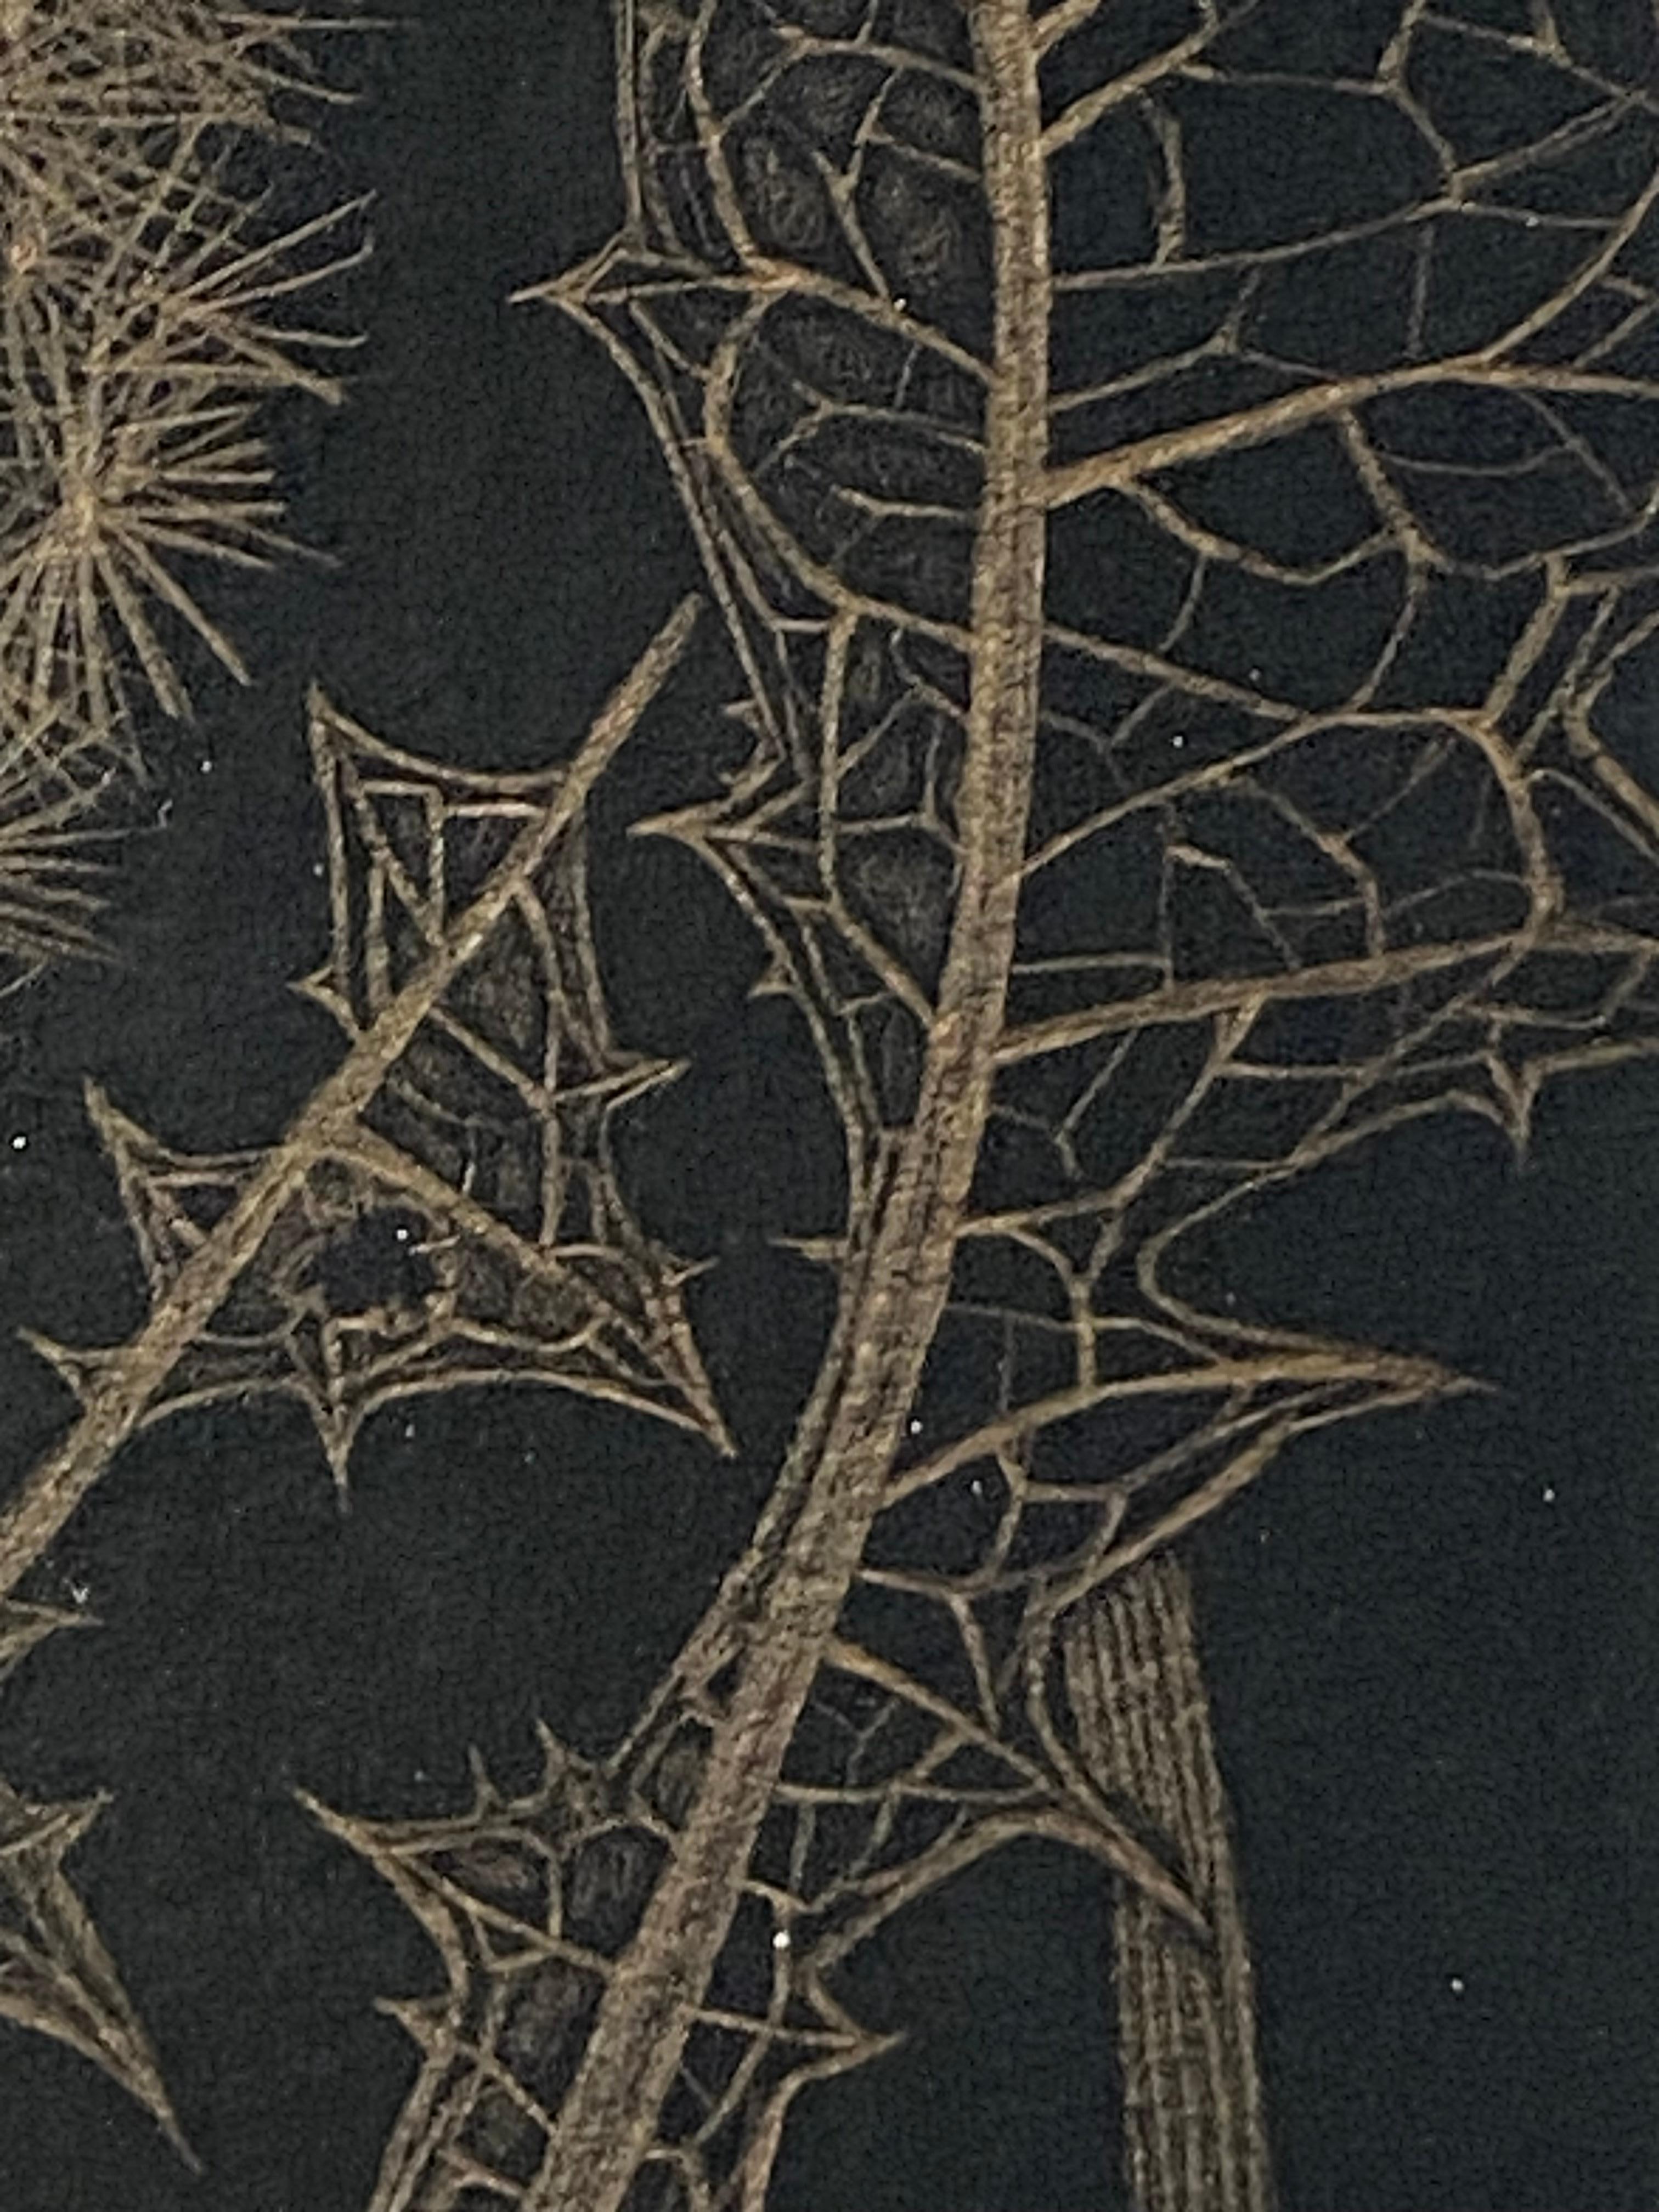 Dandelion with Two Buds, Botanical Drawing on Black Paper Made With 14K Gold 5